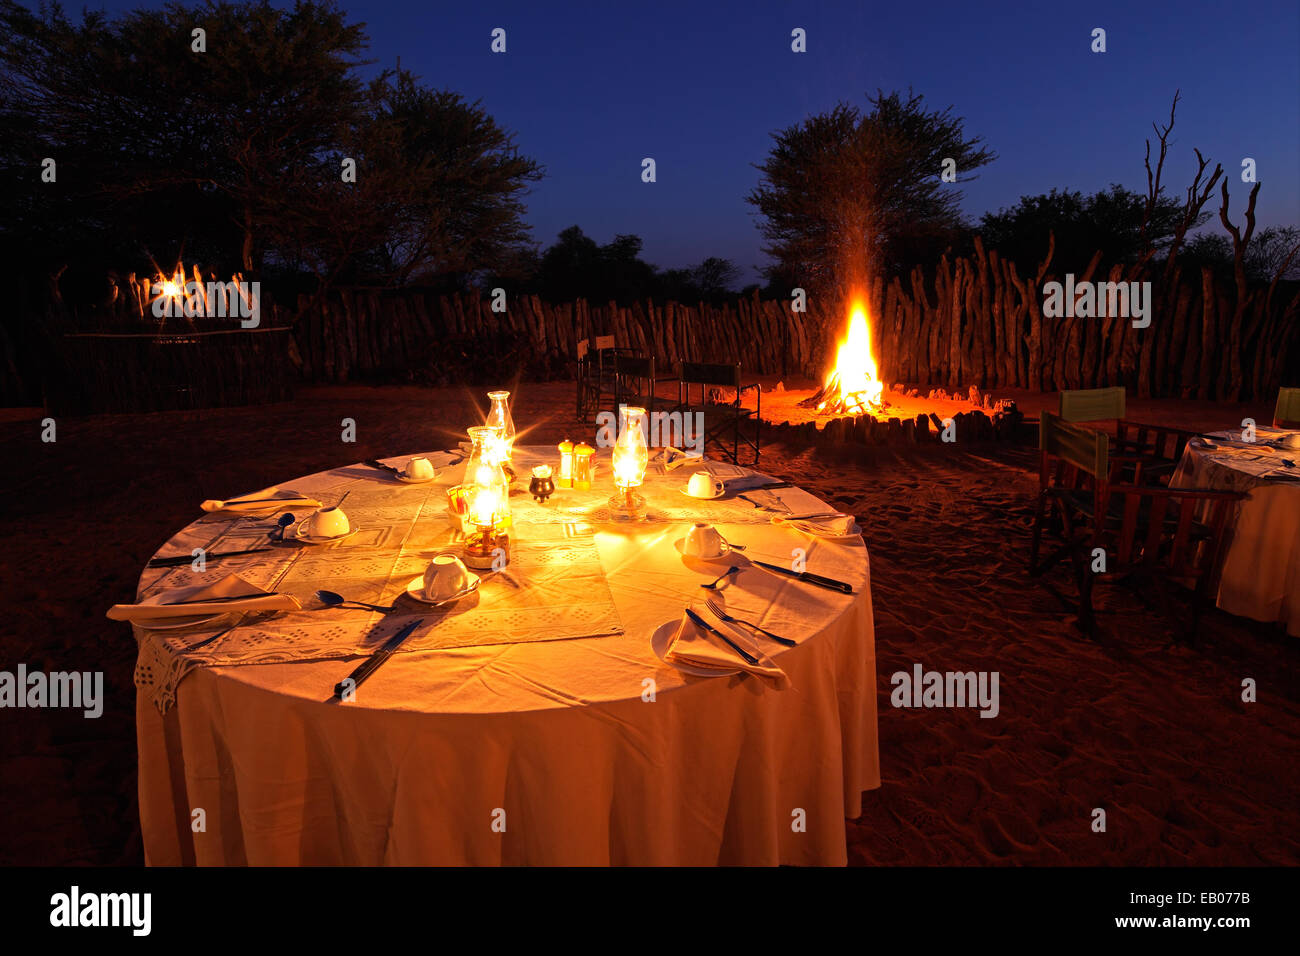 Nighttime campfire and decorated table for outdoor safari catering Stock Photo